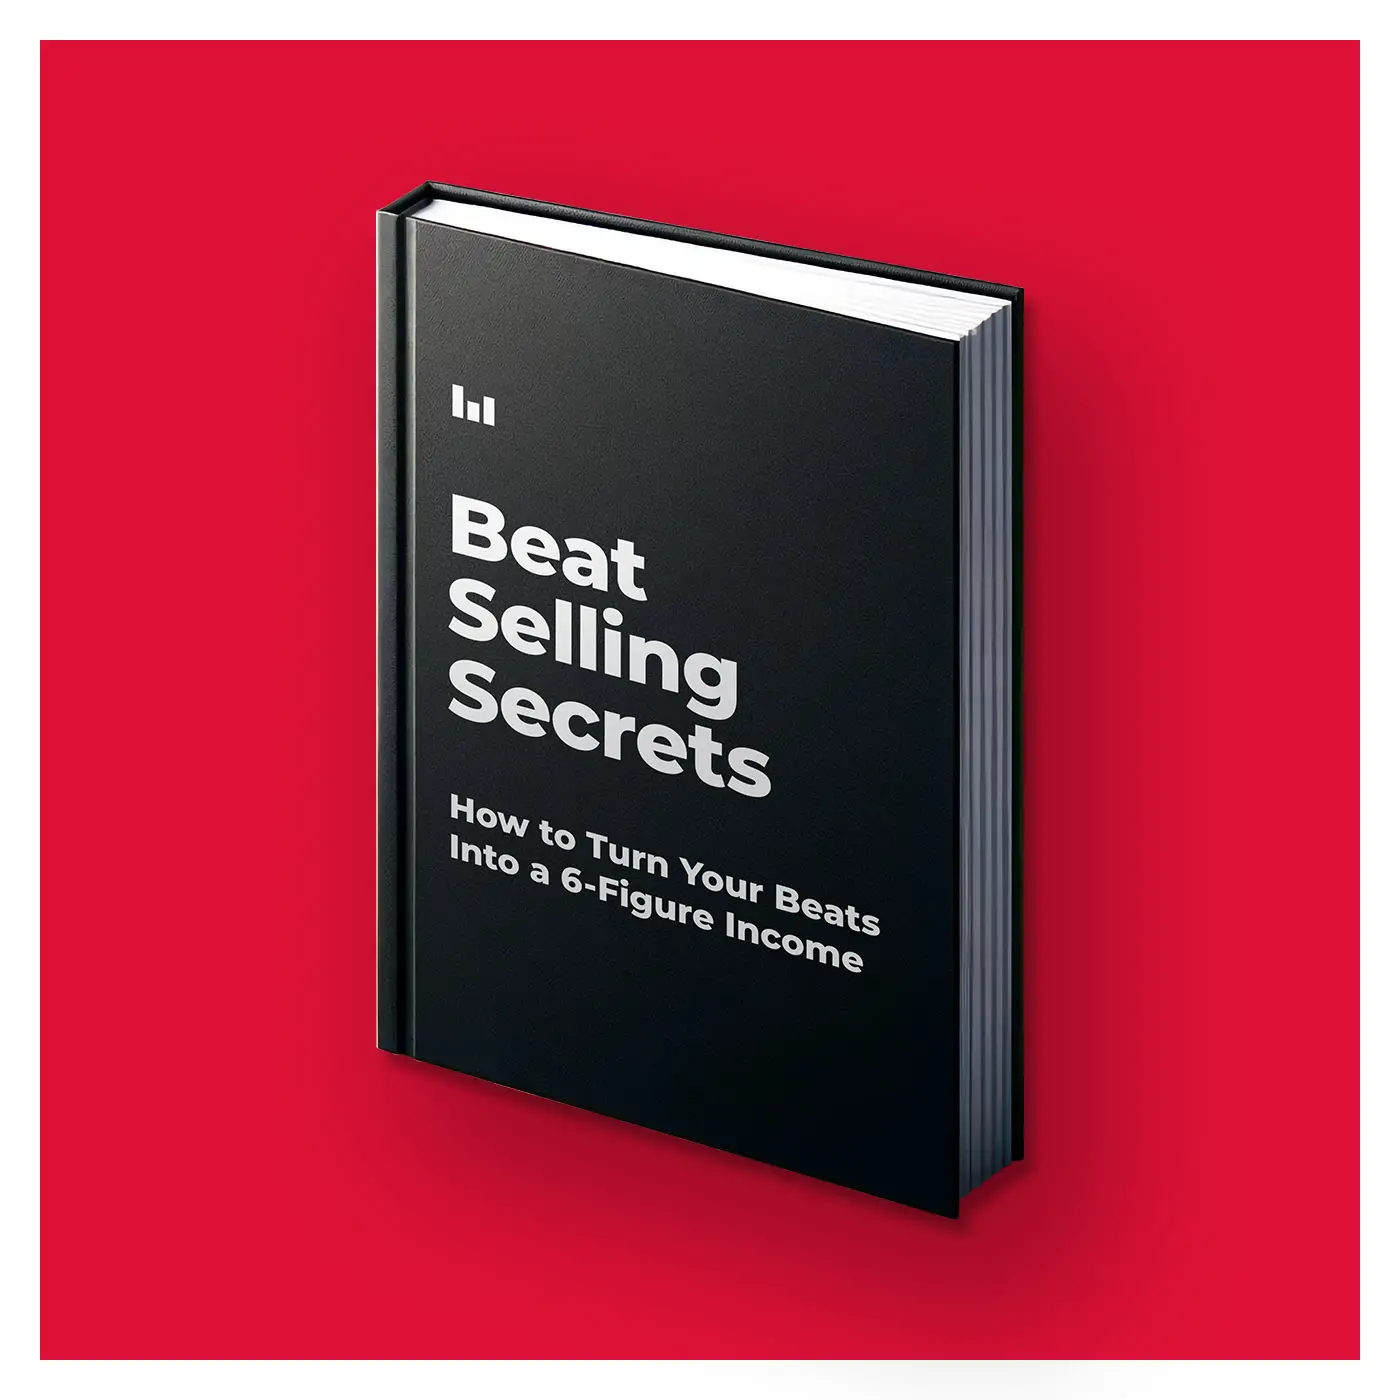 How to Sell Beats Online & Skyrocket Your Sales